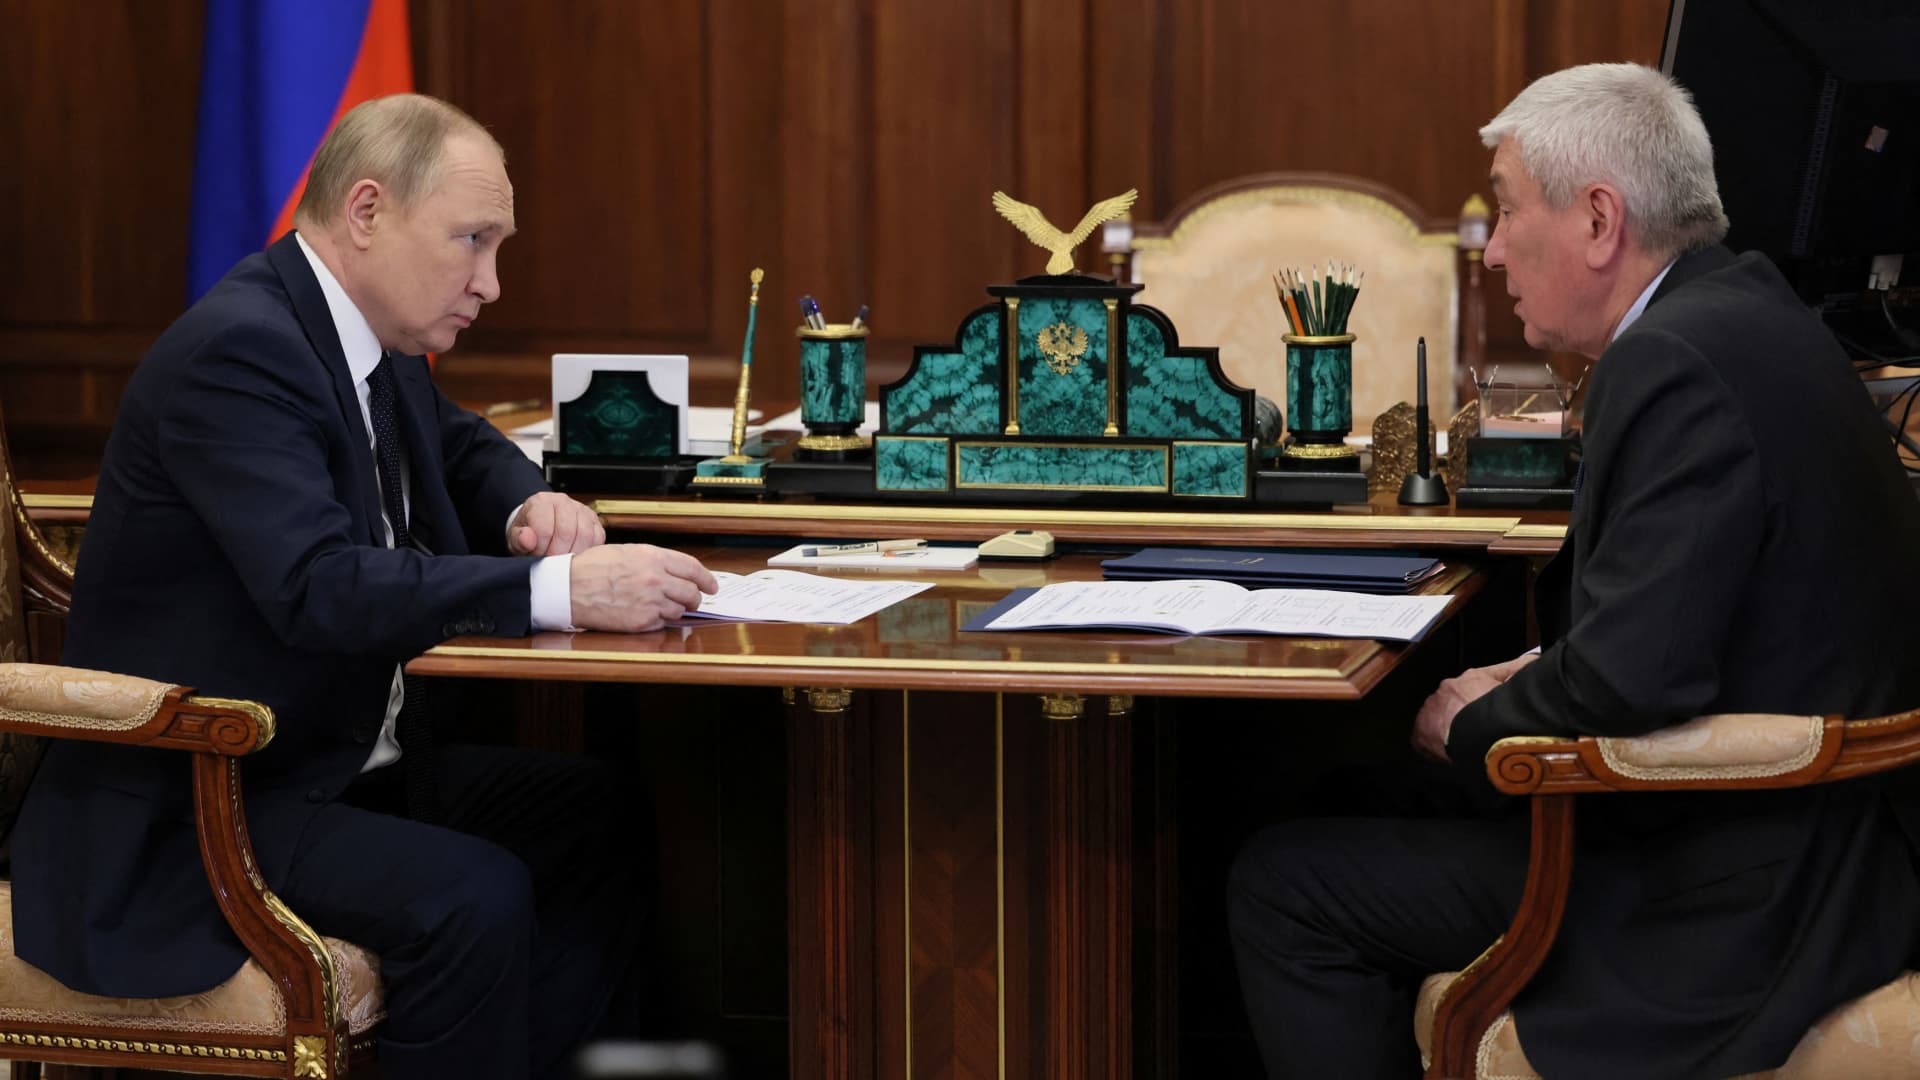 Russian President Vladimir Putin meets with head of Federal Financial Monitoring Service (Rosfinmonitoring) Yury Chikhanchin at the Kremlin in Moscow, Russia June 27, 2022.